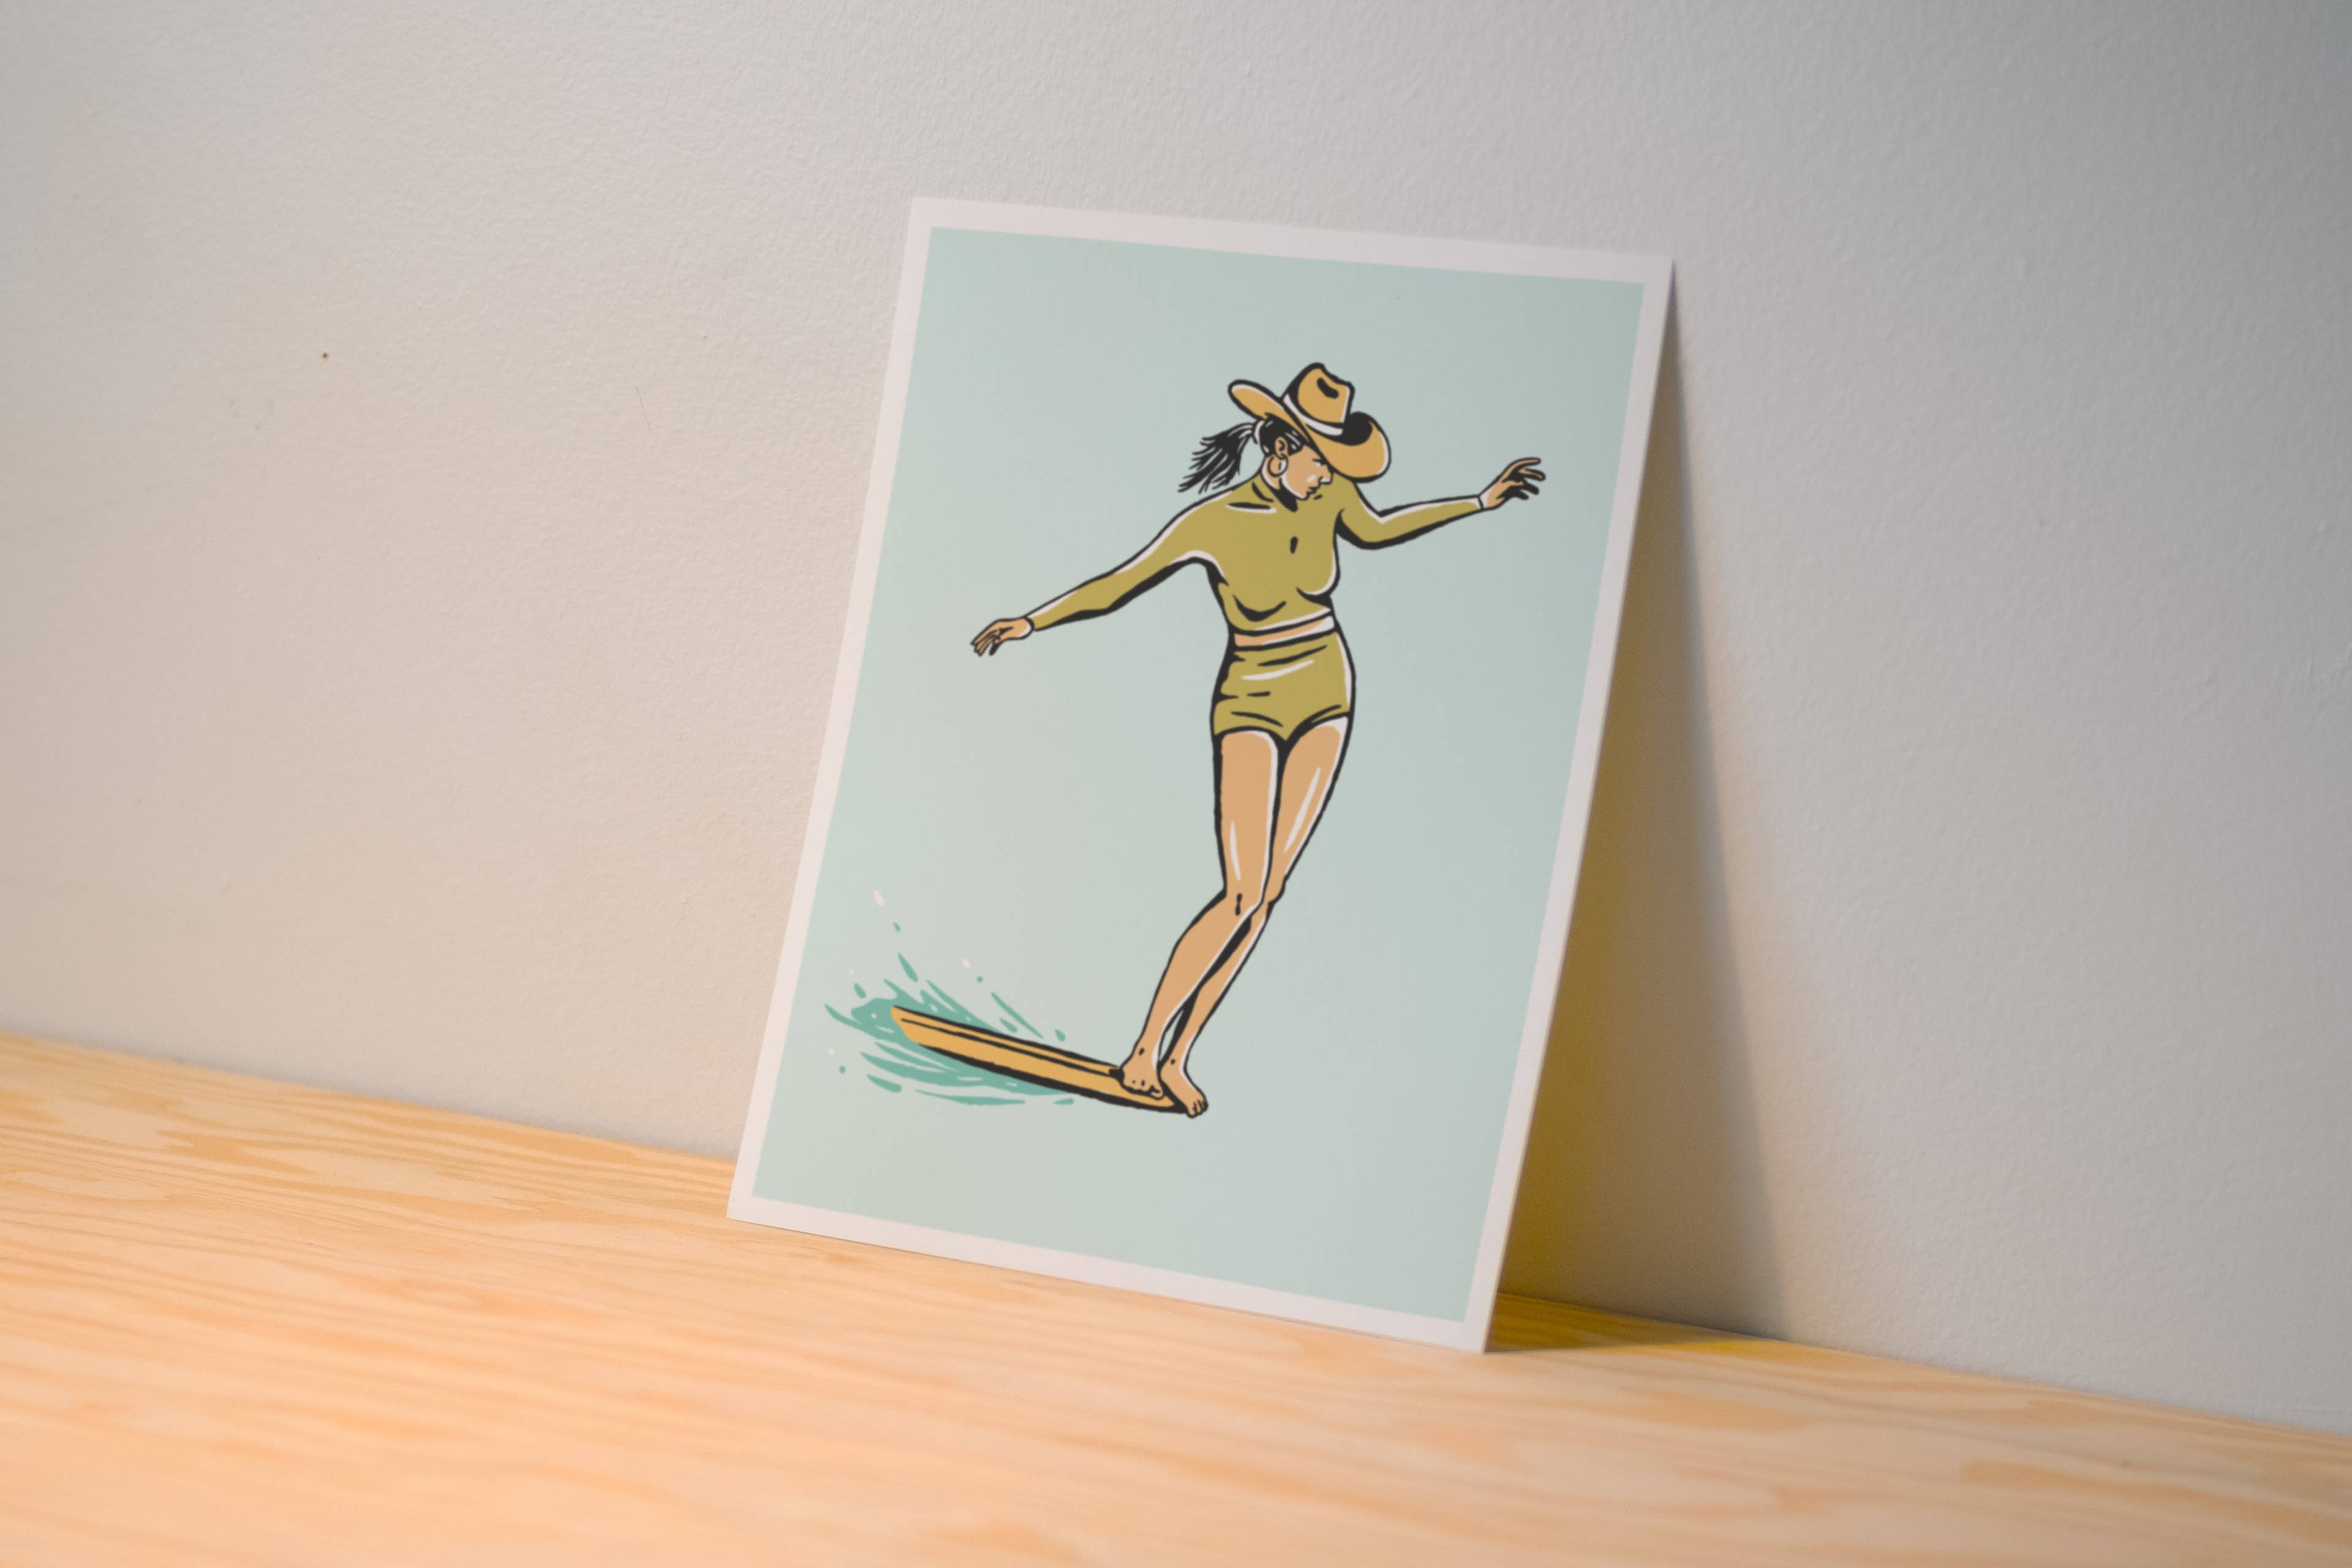 Kamin Tersieff - Surf Cowgirl - Nose Riding Print - Illustration Poster: 8x10